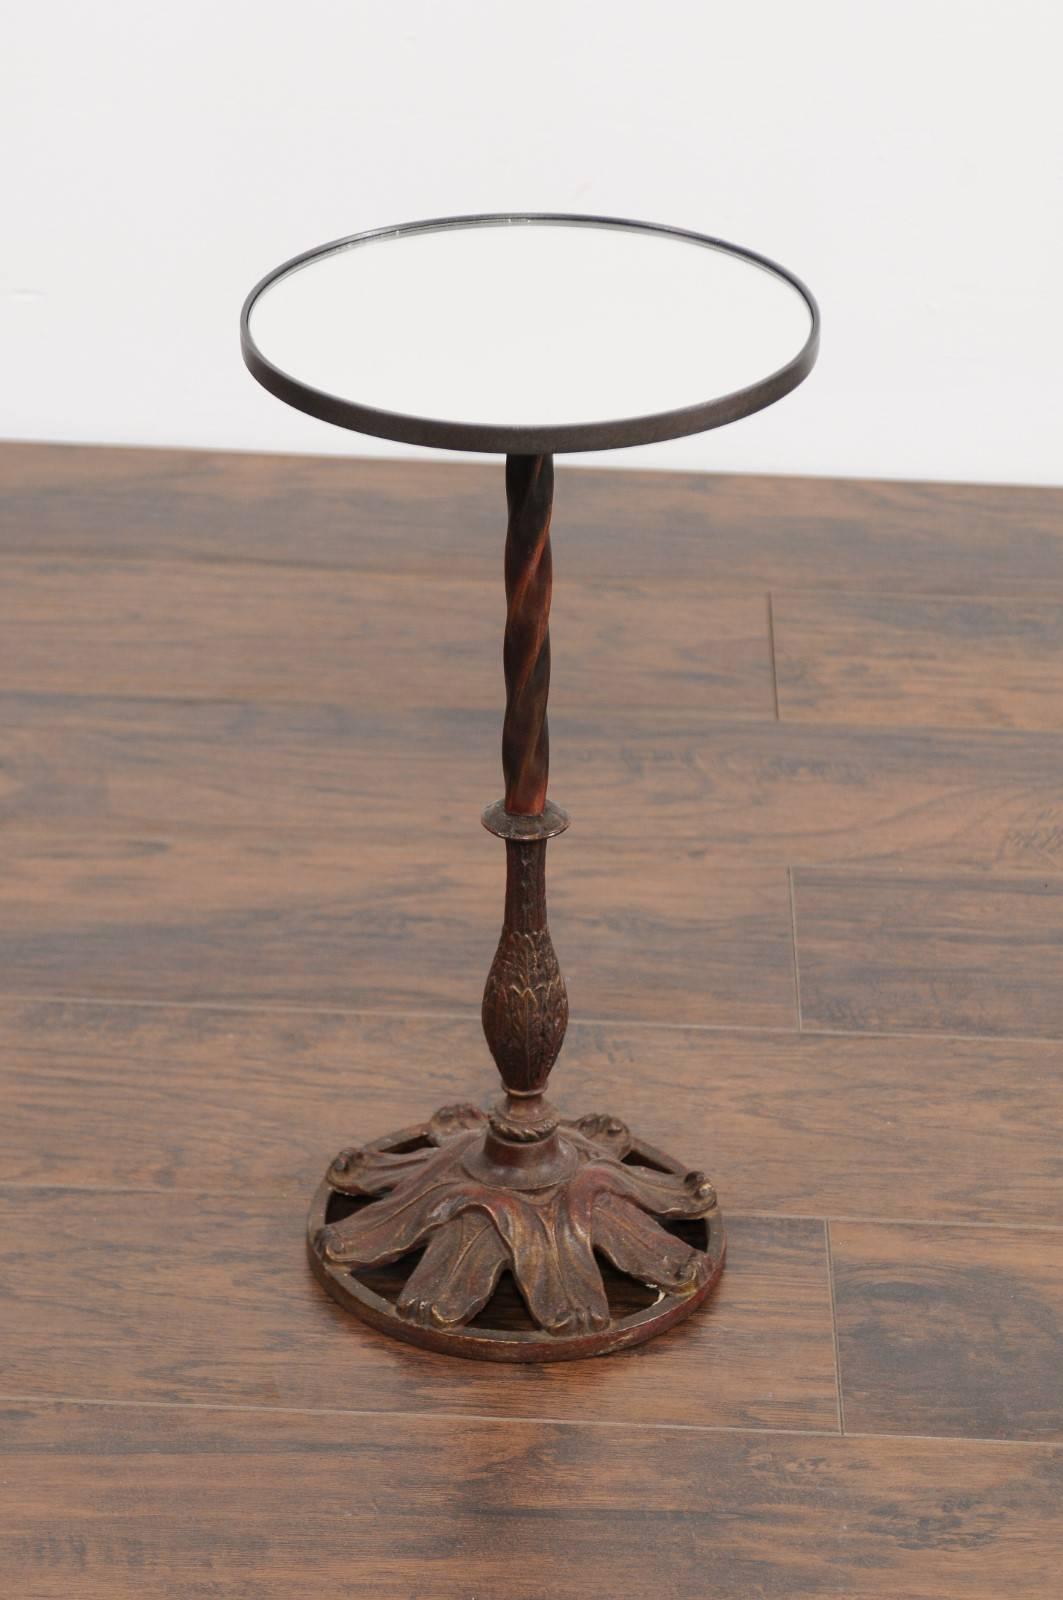 20th Century 1920s French Iron Round Drink Table with Pedestal Base, Foliage and Mirrored Top